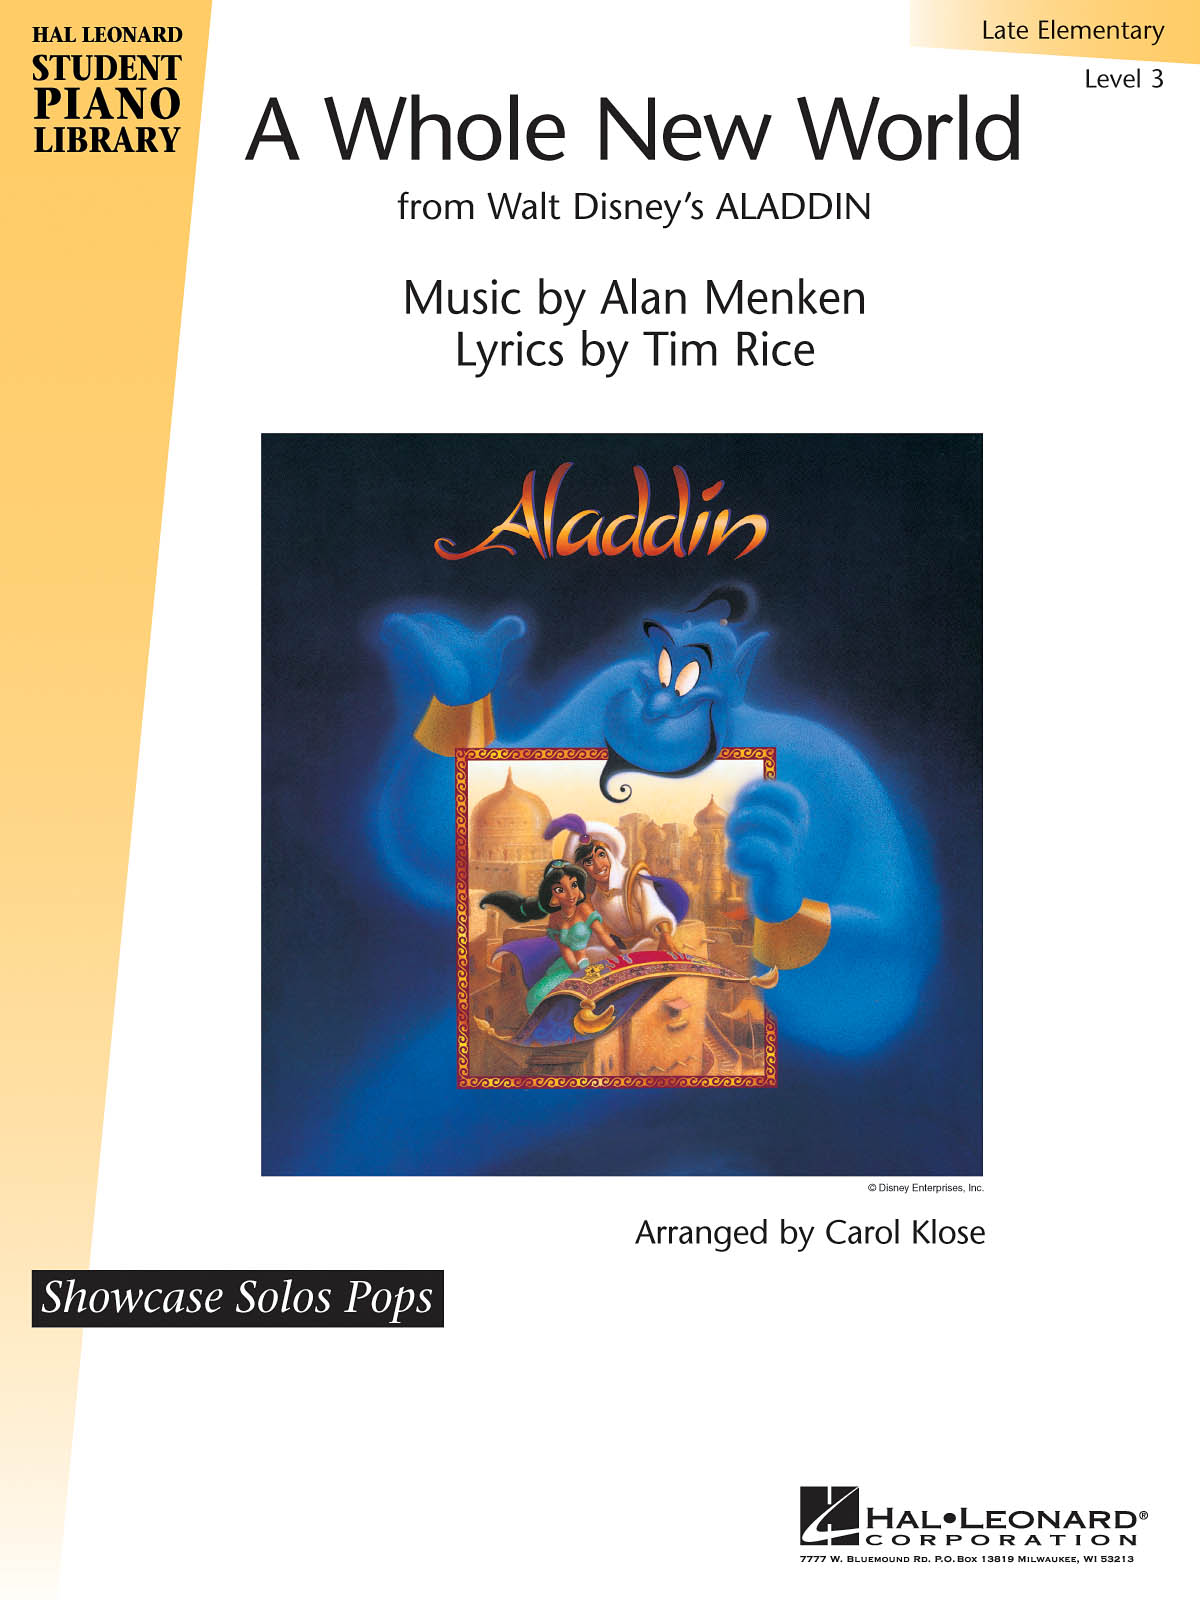 A Whole New World(Hal Leonard Student Piano Library Showcase Solos Pops Level 3 Late Elementary))